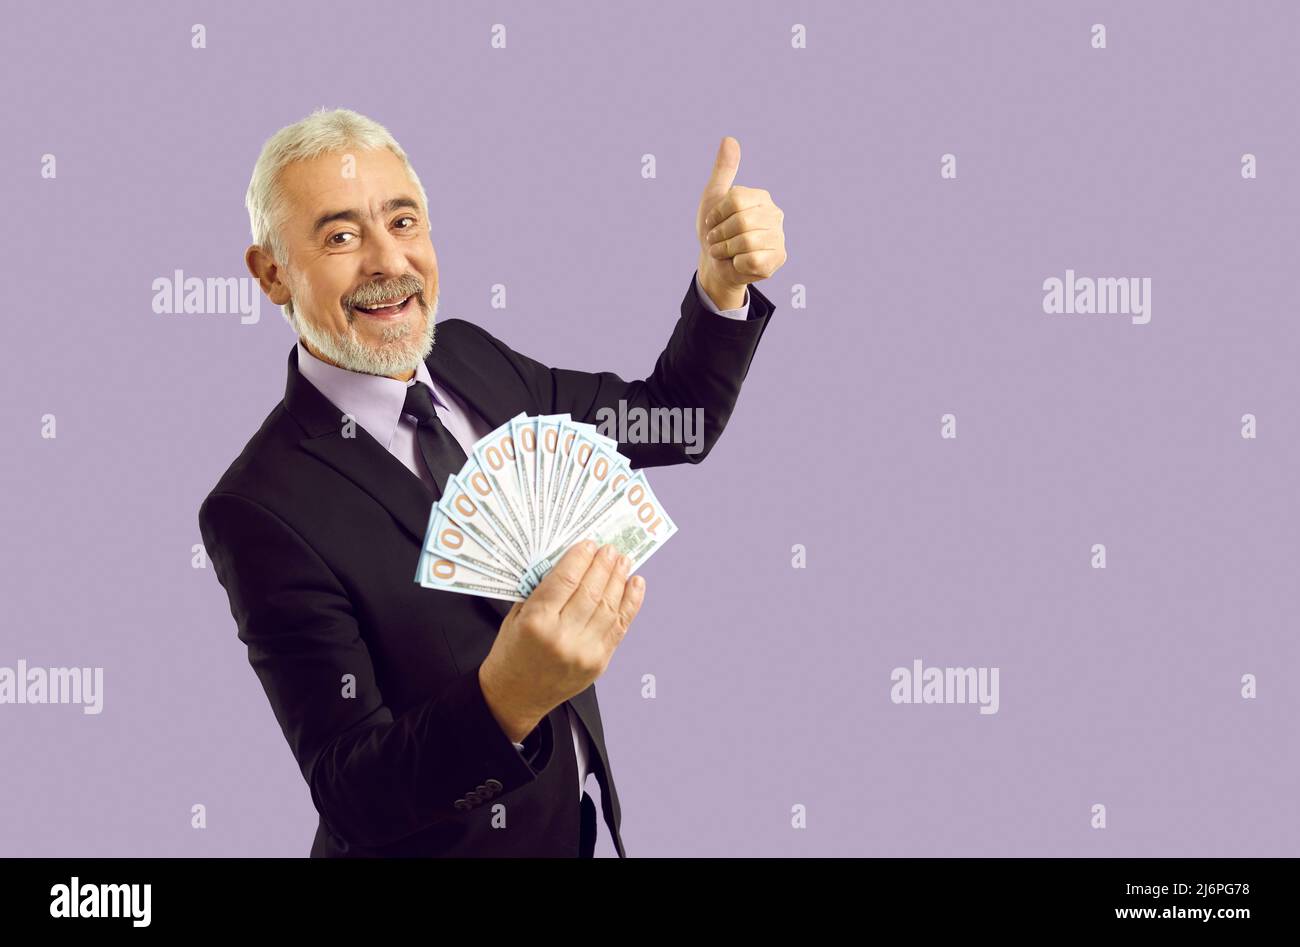 Smiling aged businessman with dollars in hands Stock Photo